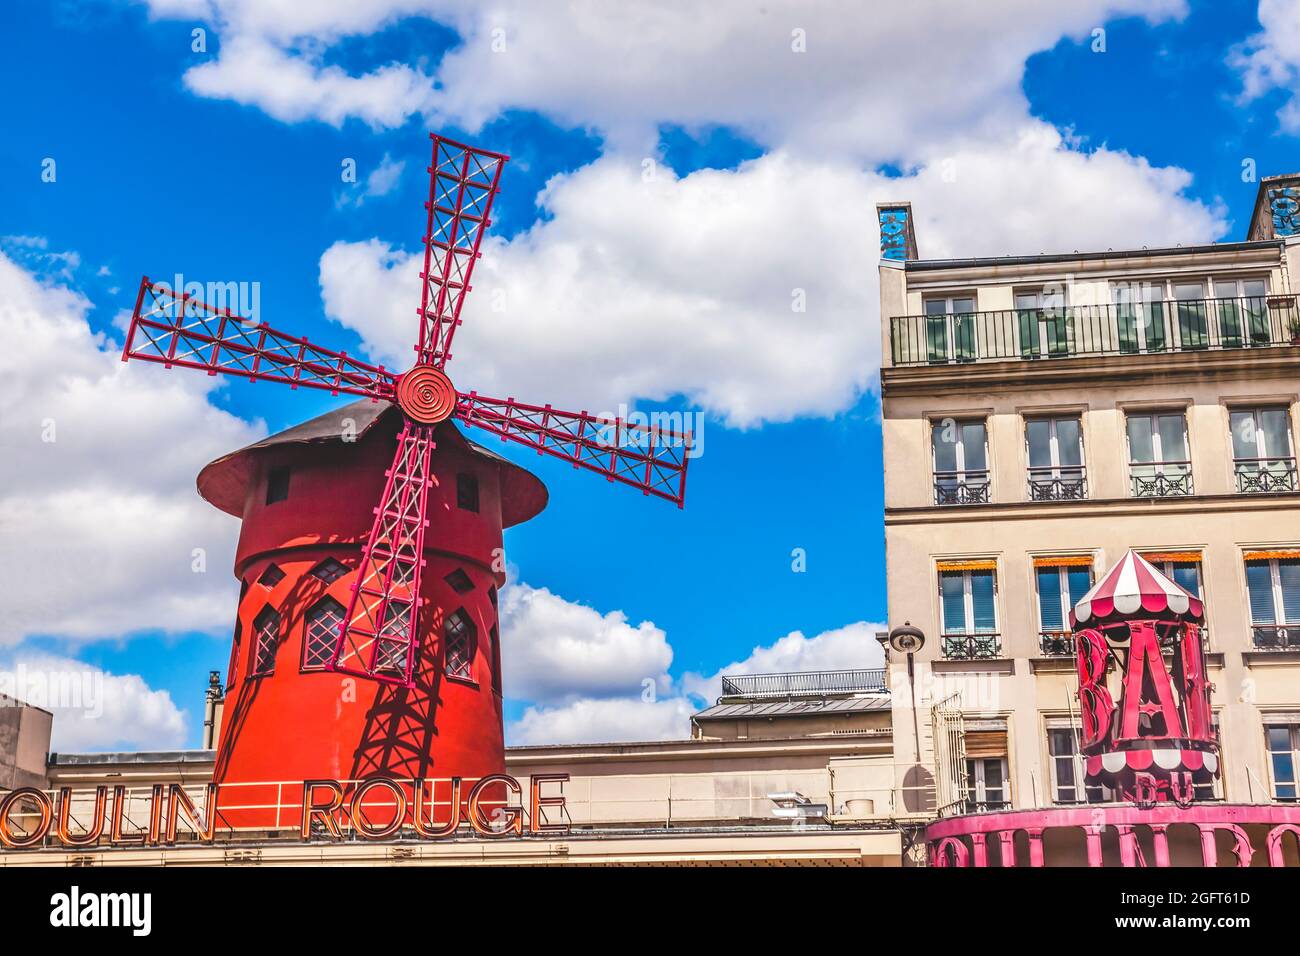 Famous Red Windmill Moulin Rouge Nightclub Cabaret Paris France.  Opened 1915 where Can Can dance was first shown. Stock Photo